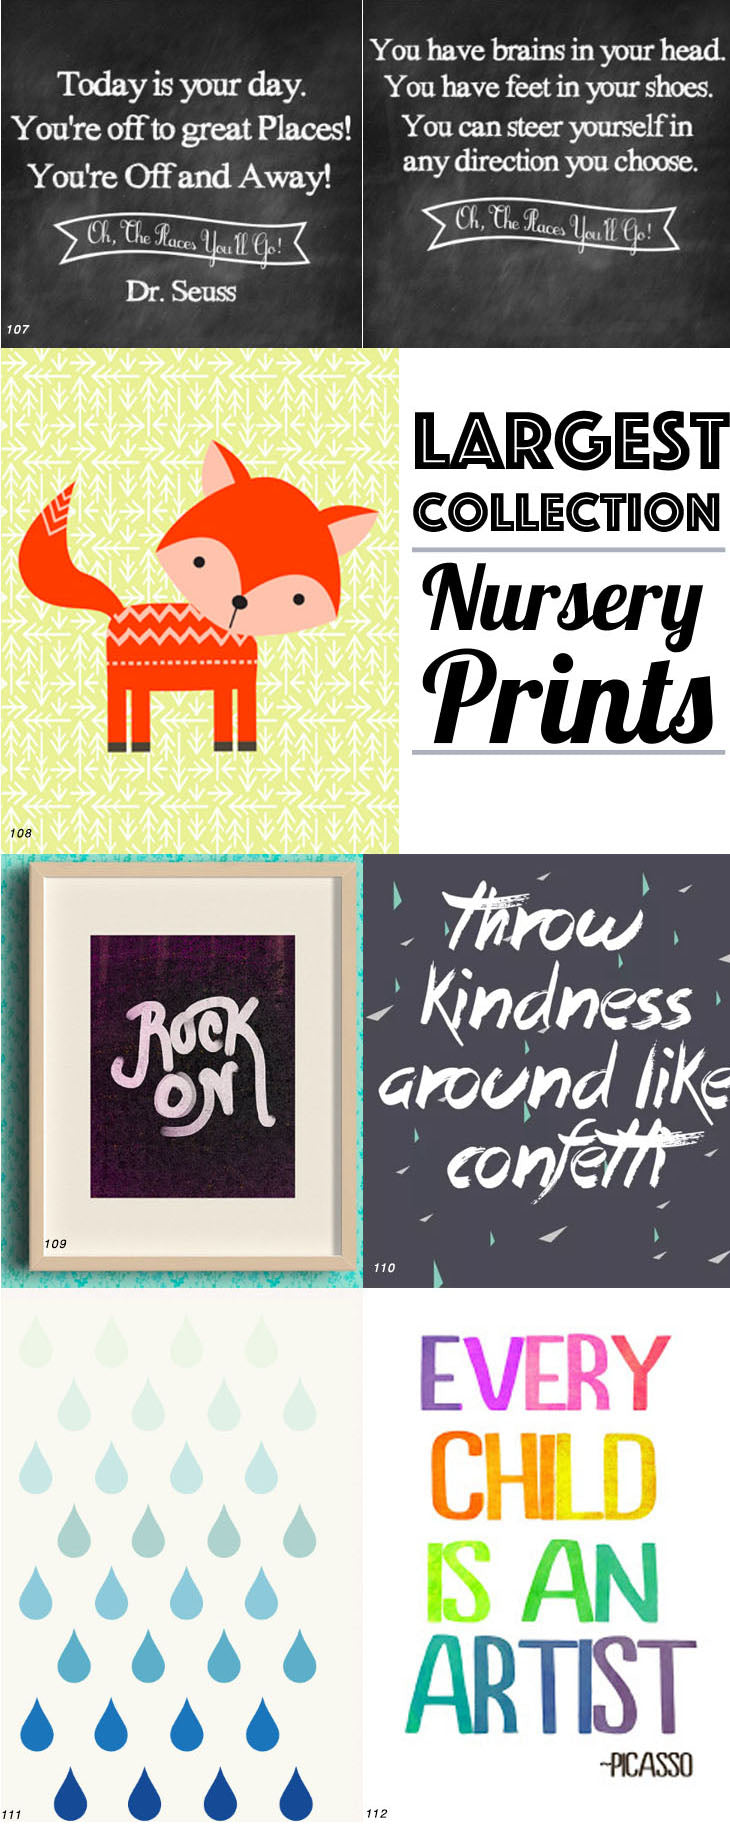 Largest Collection Nursery Prints